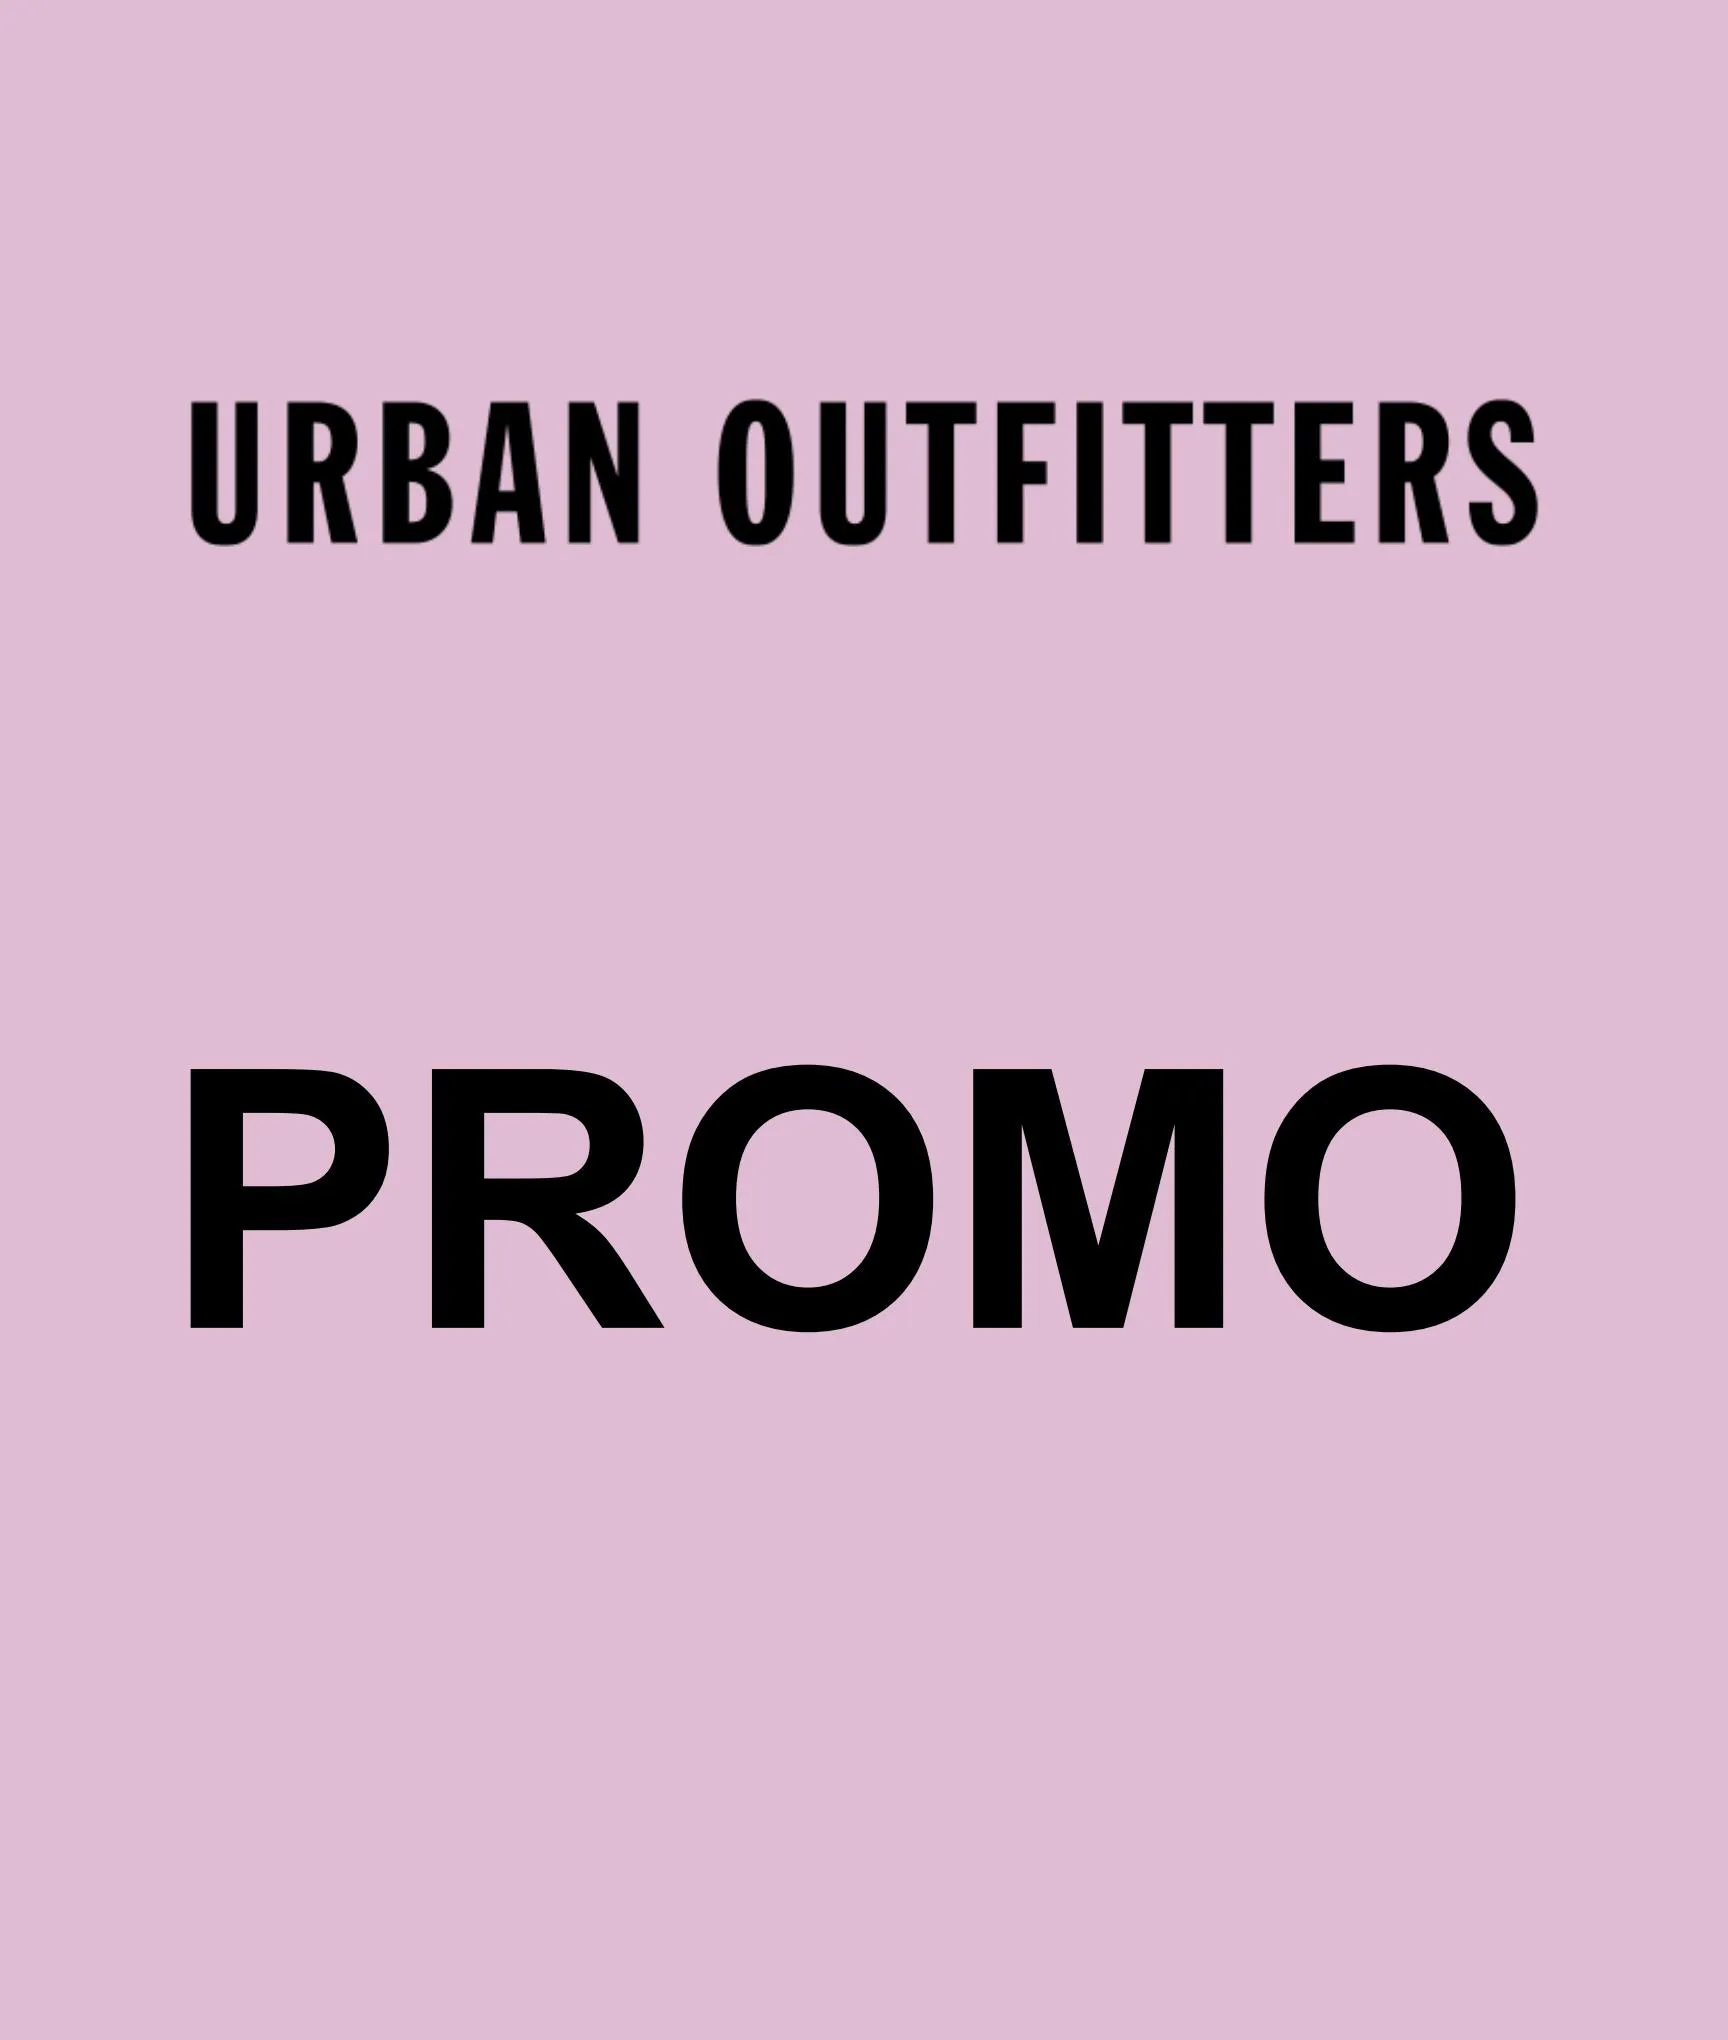 Catalogue Promo Urban Outfitters!, page 00001